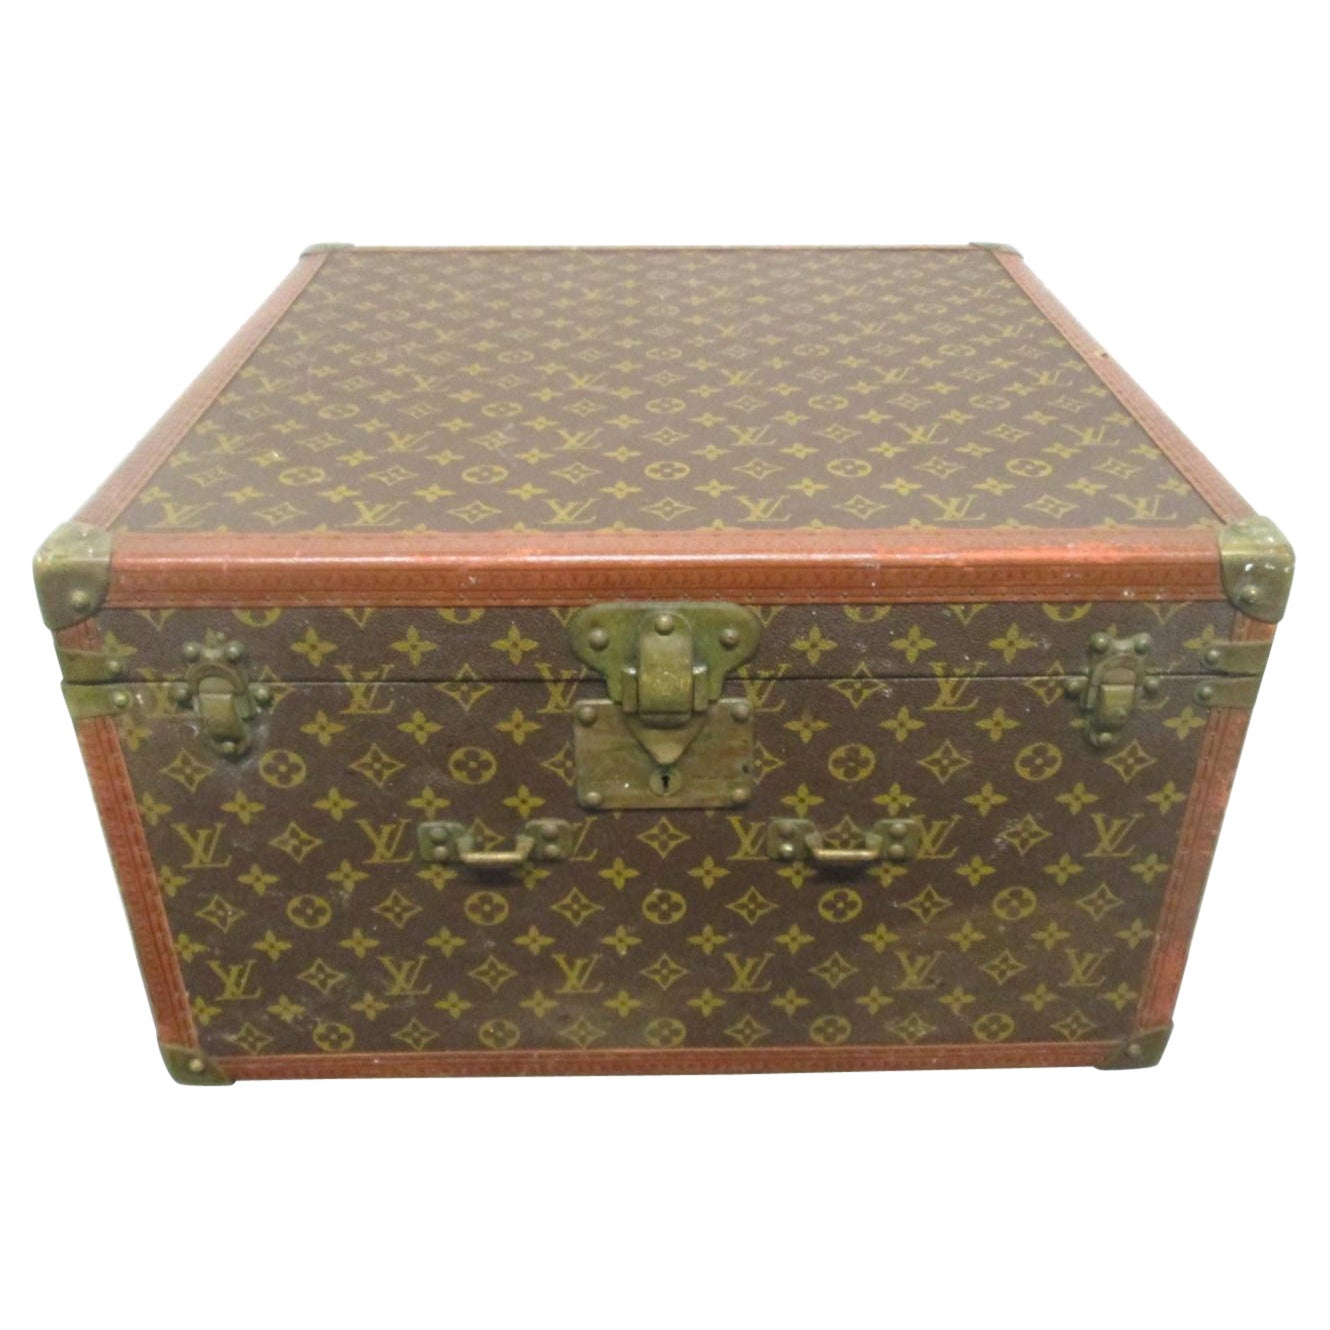 Would You Rather: This Supreme X Louis Vuitton Trunk Or A Home Deposit?